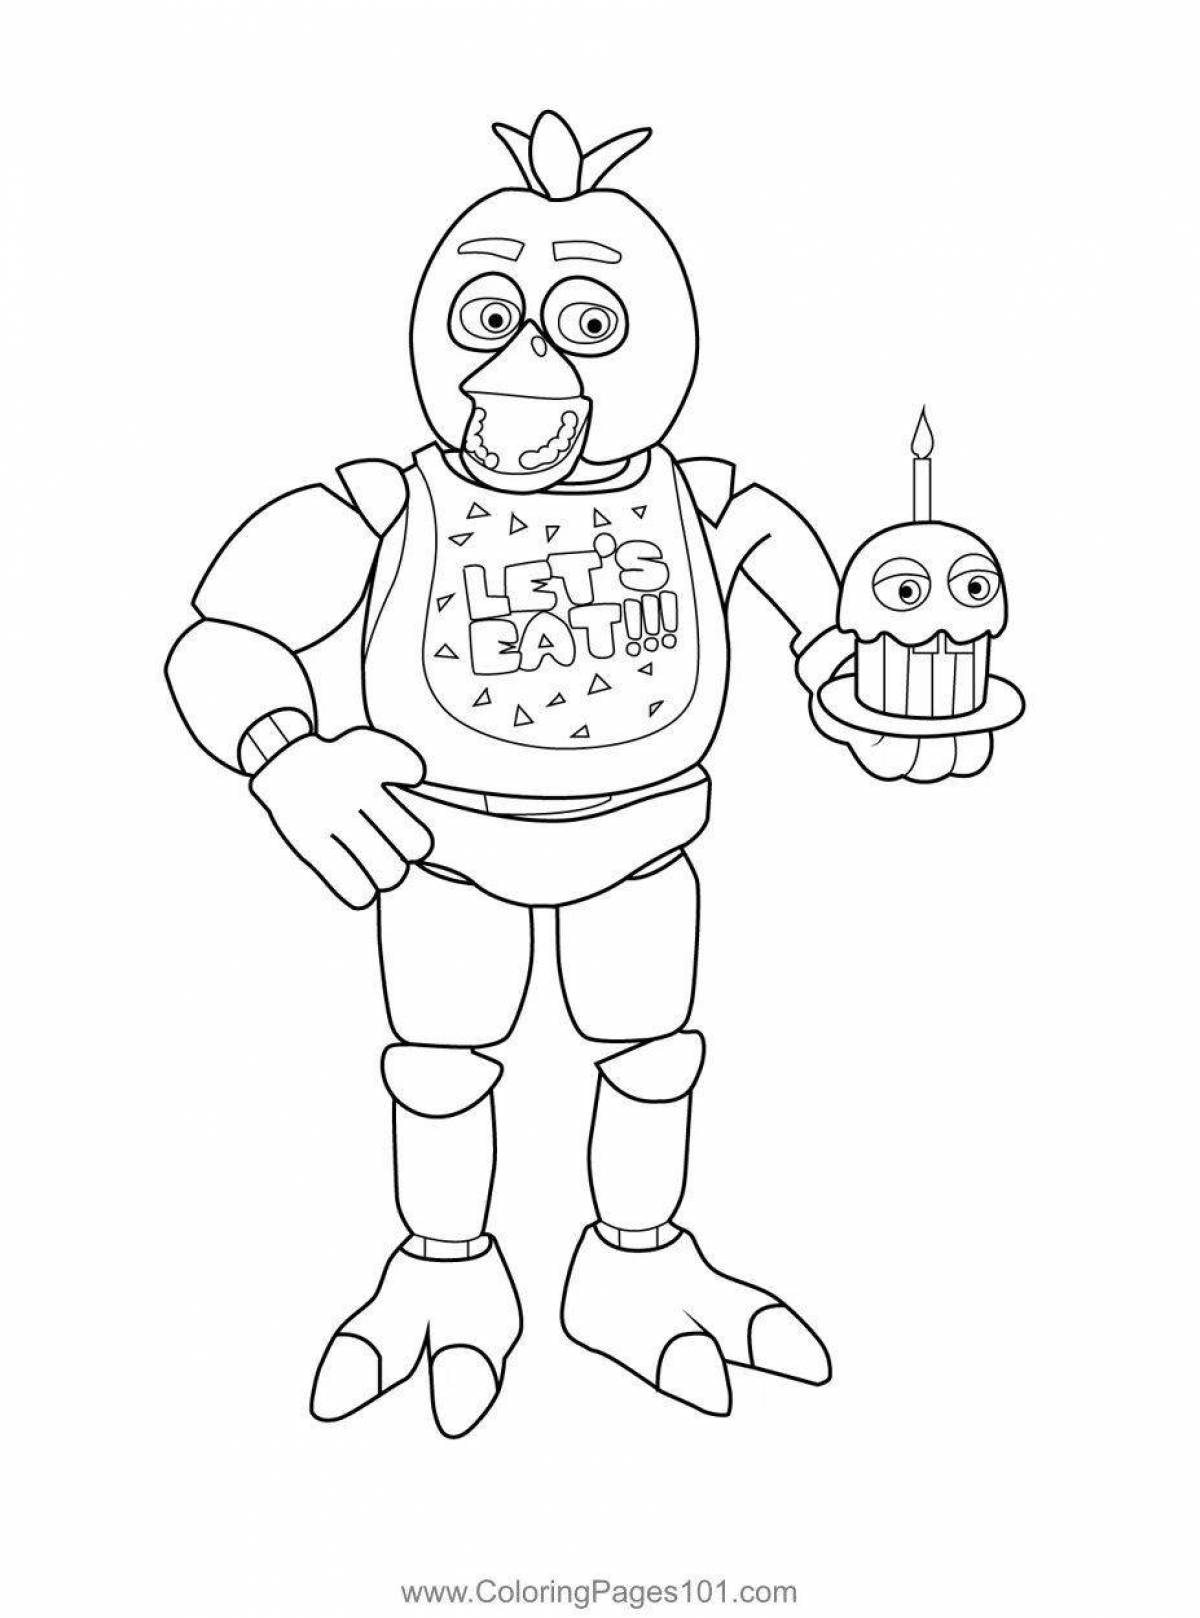 Drawing chiki from fnaf 1 coloring book